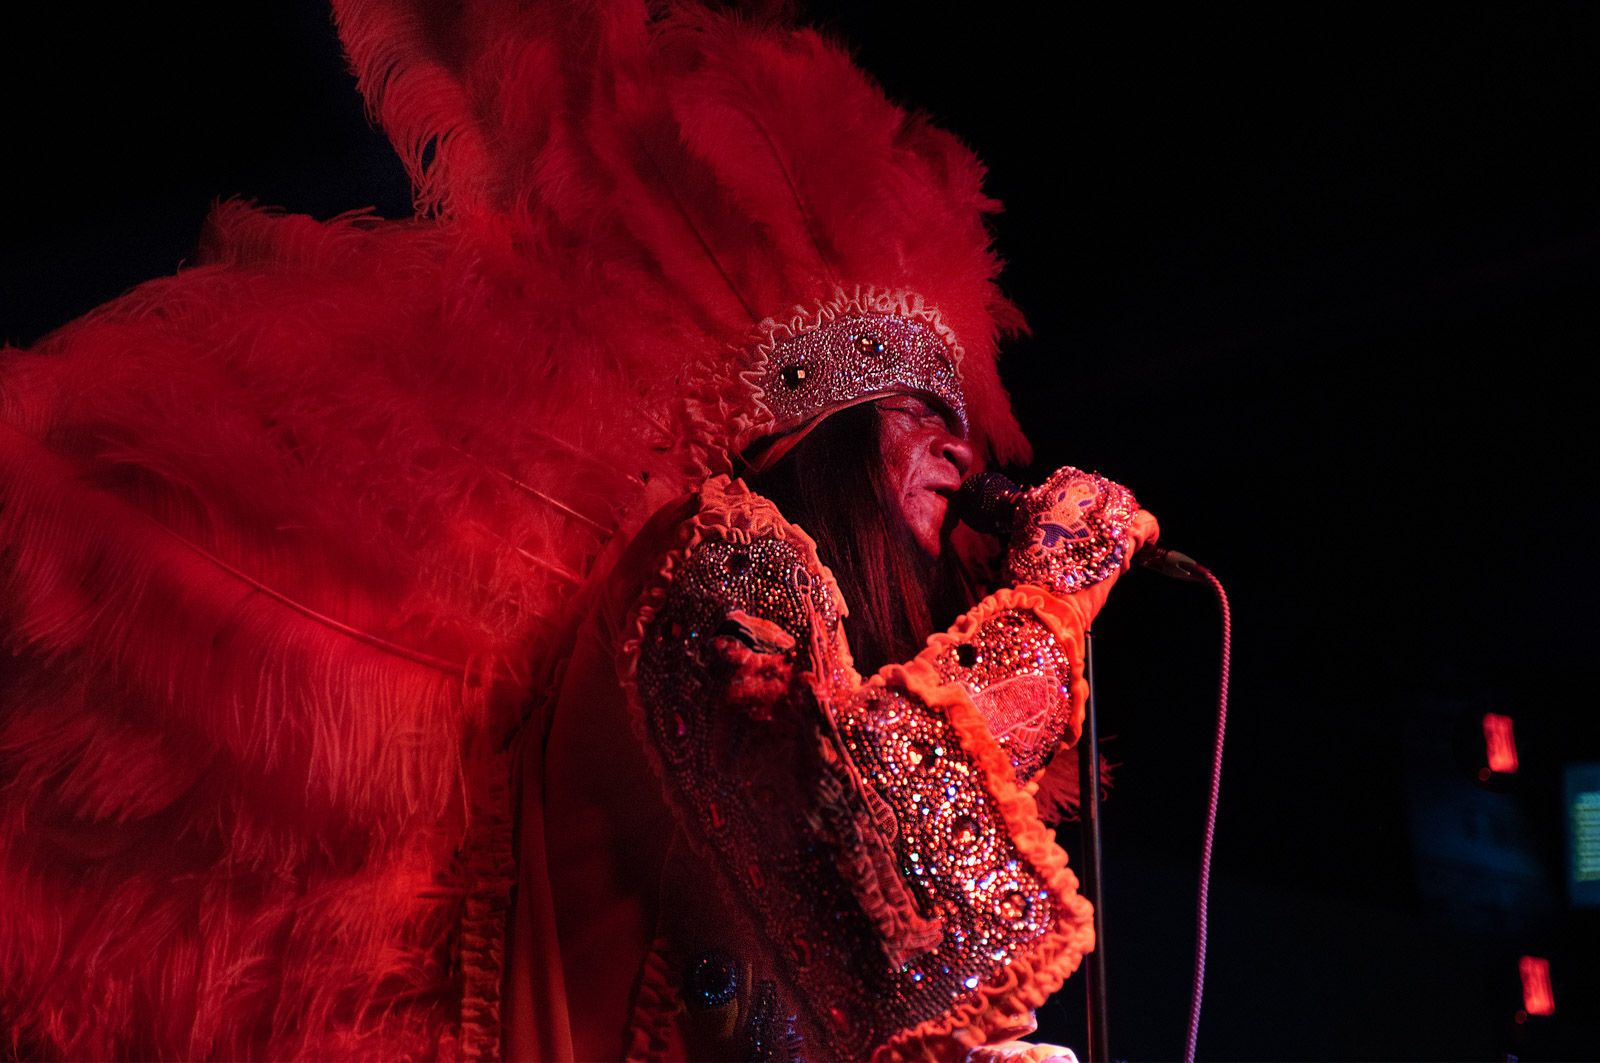 Big Chief Monk Boudreaux of the Golden Eagles performing at the Blue Nile